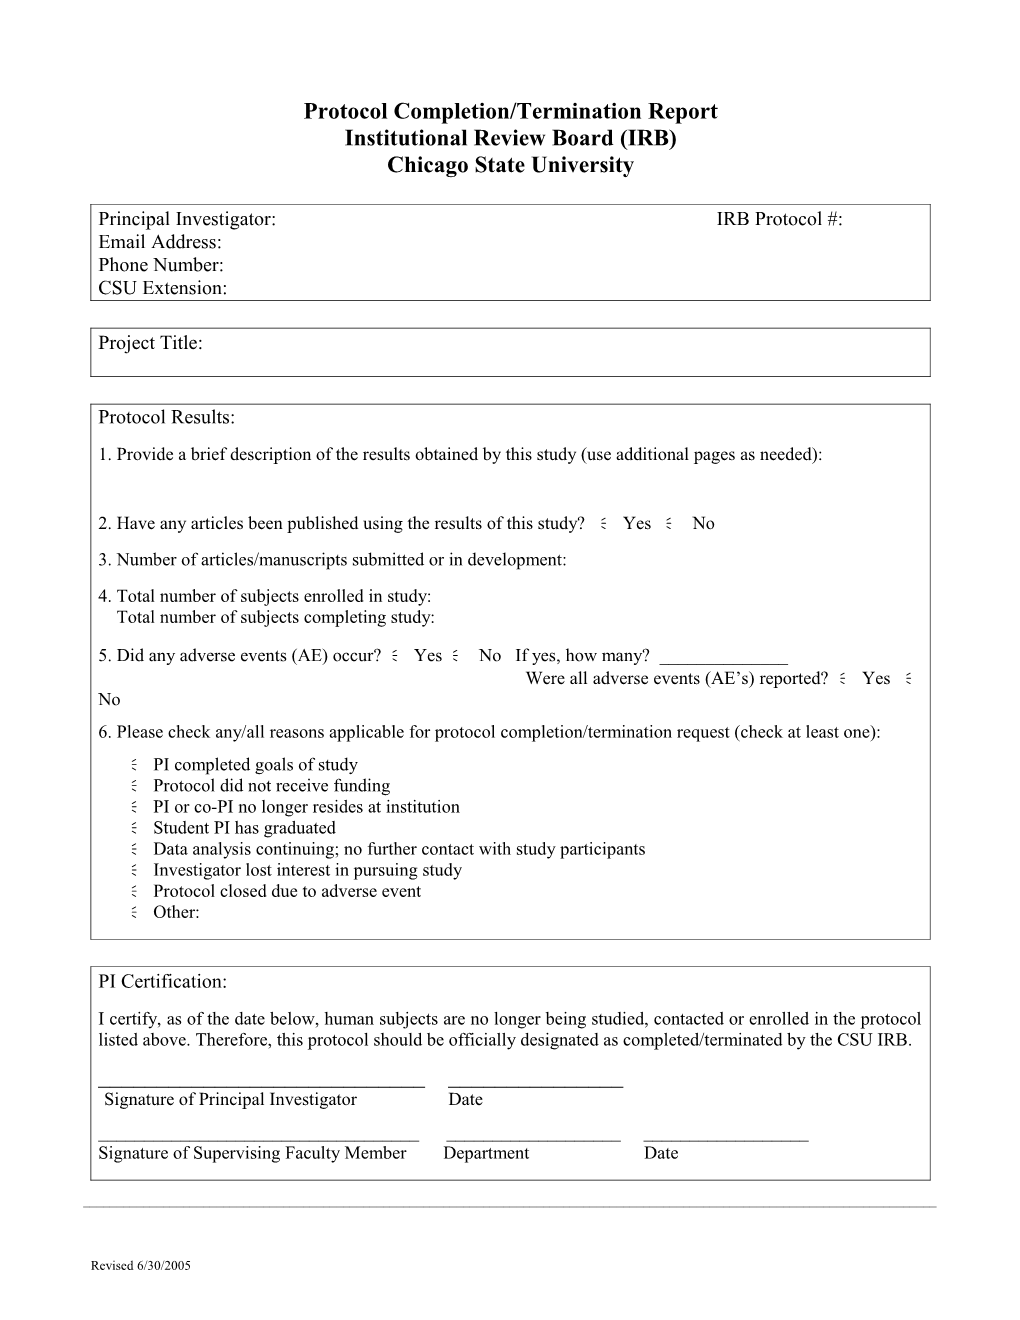 Initial Review Application